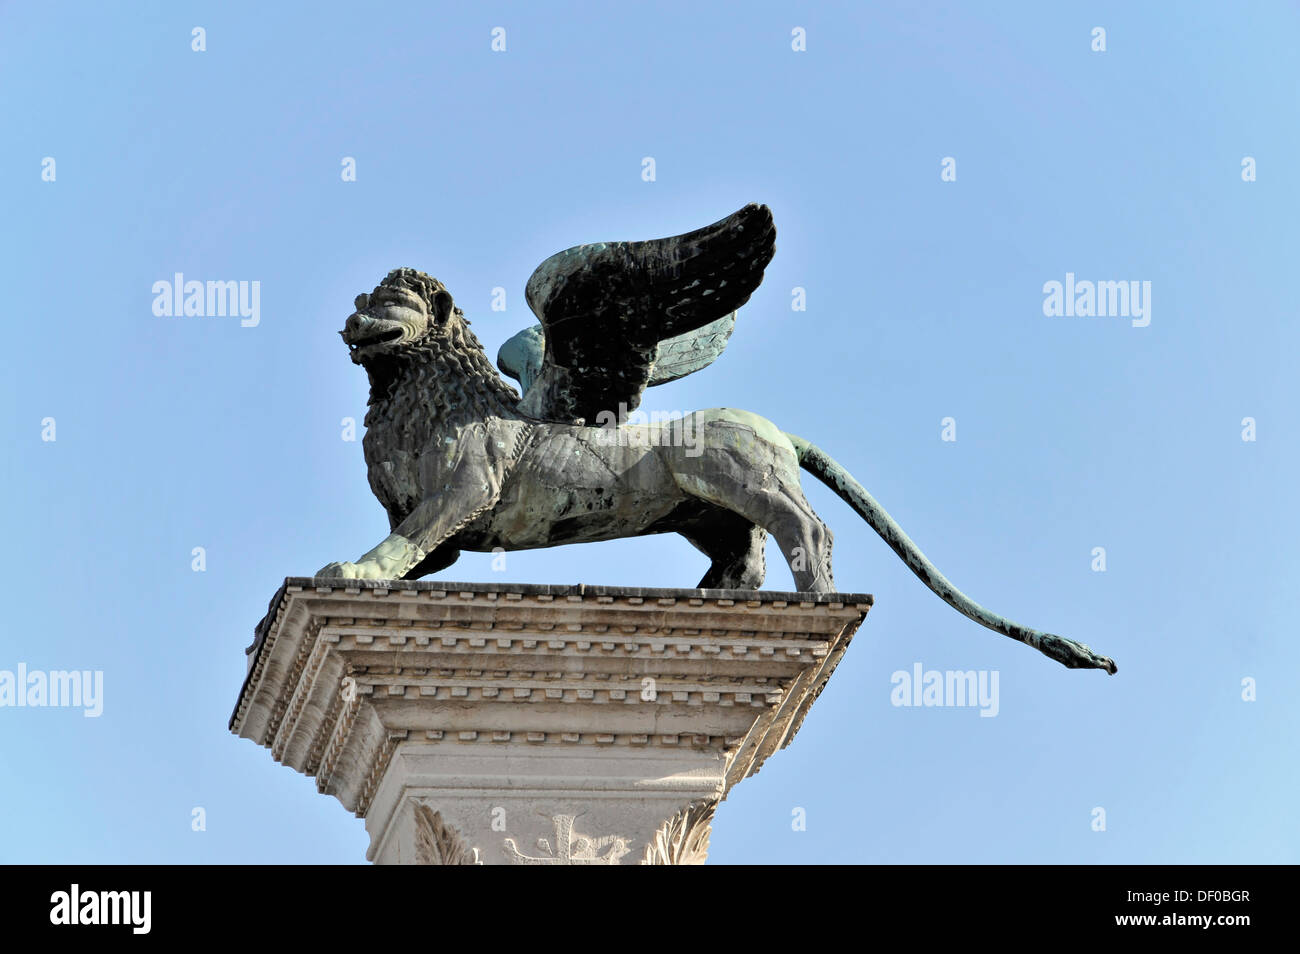 Column, capital with the winged lion of St. Mark, the patron saint of Venice, Piazzetta San Marco, St. Mark's Square, Venice Stock Photo